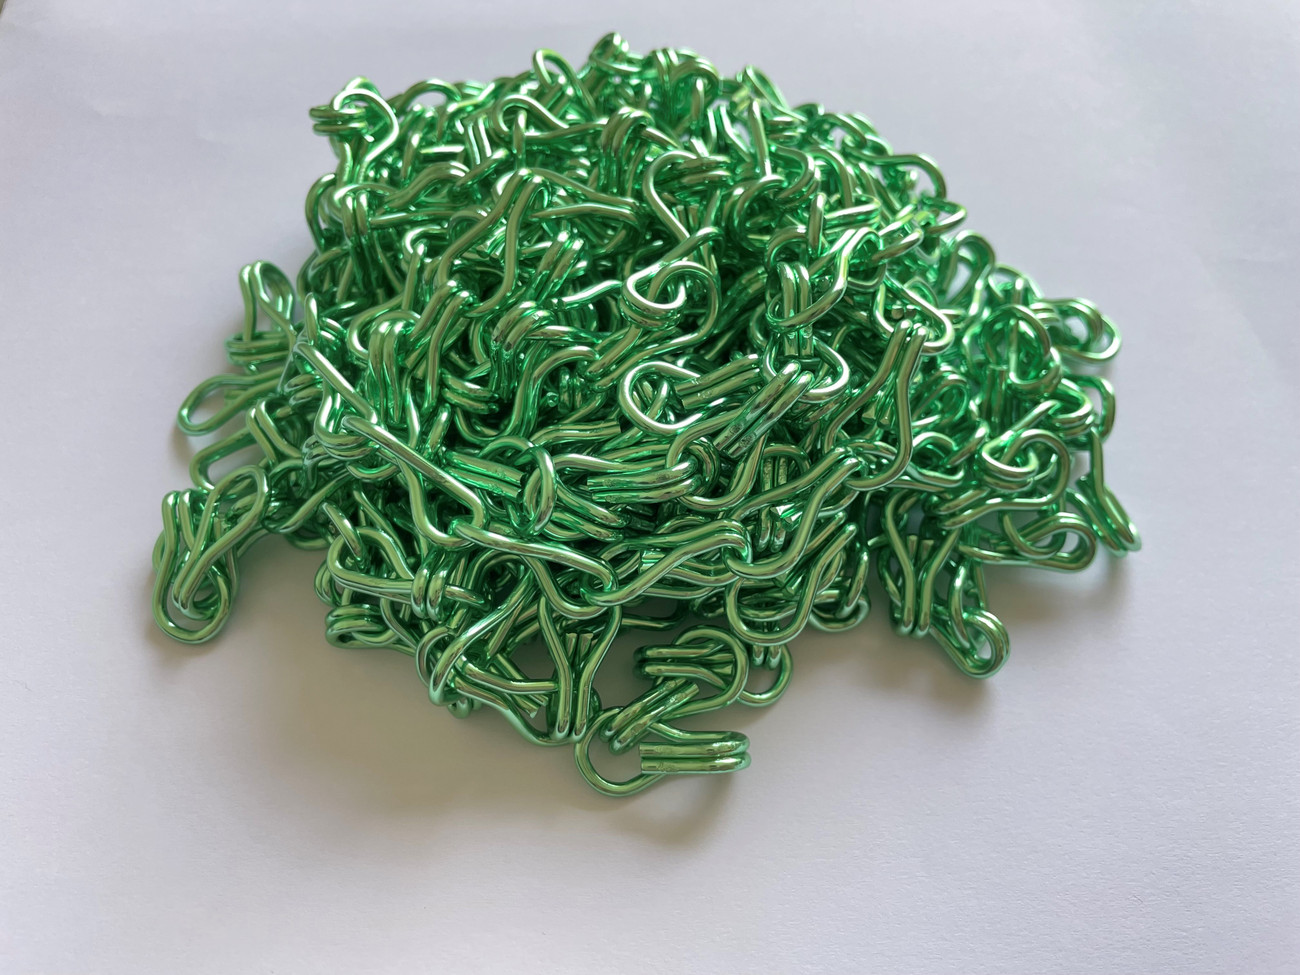 Light Green Premium Aluminium Chain. This colour is exclusive to the UK market here at Sway Screens. This chain is made from high quality commercial grade aluminium and is the best chain to prevent flies, bees, wasps and other flying insects from entering your home or business.